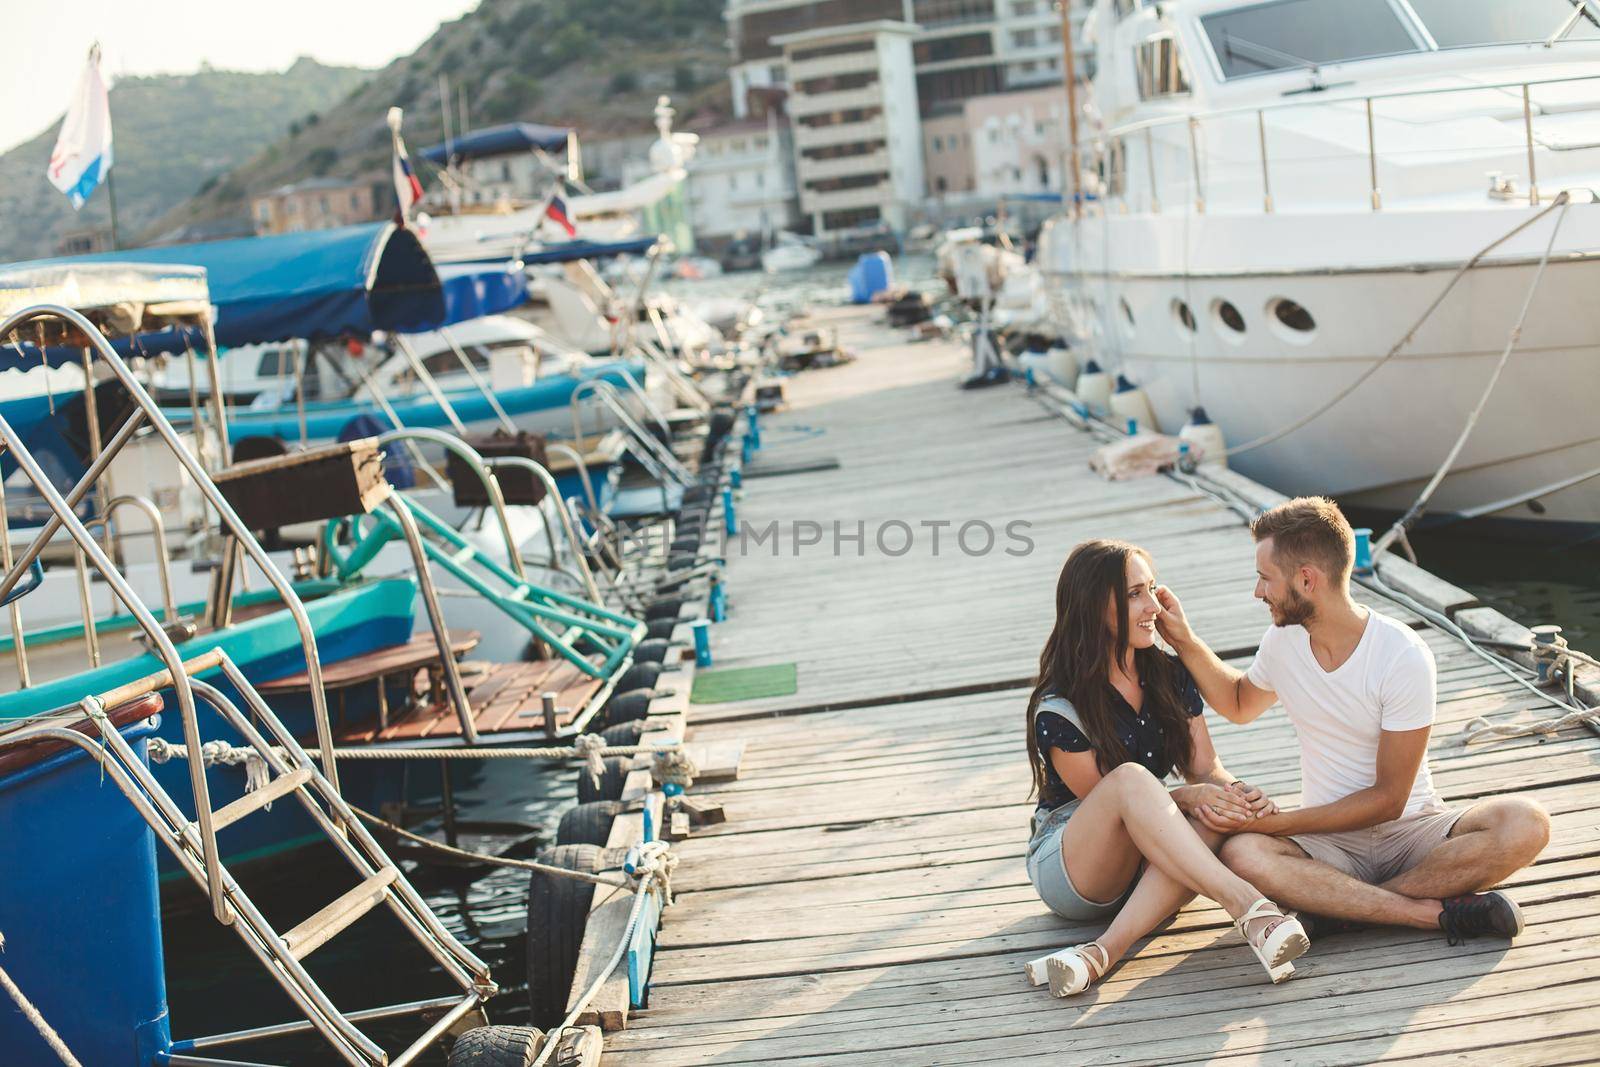 Lovers, guy and girl, are sitting on a wooden pier, holding hands and laughing by StudioPeace